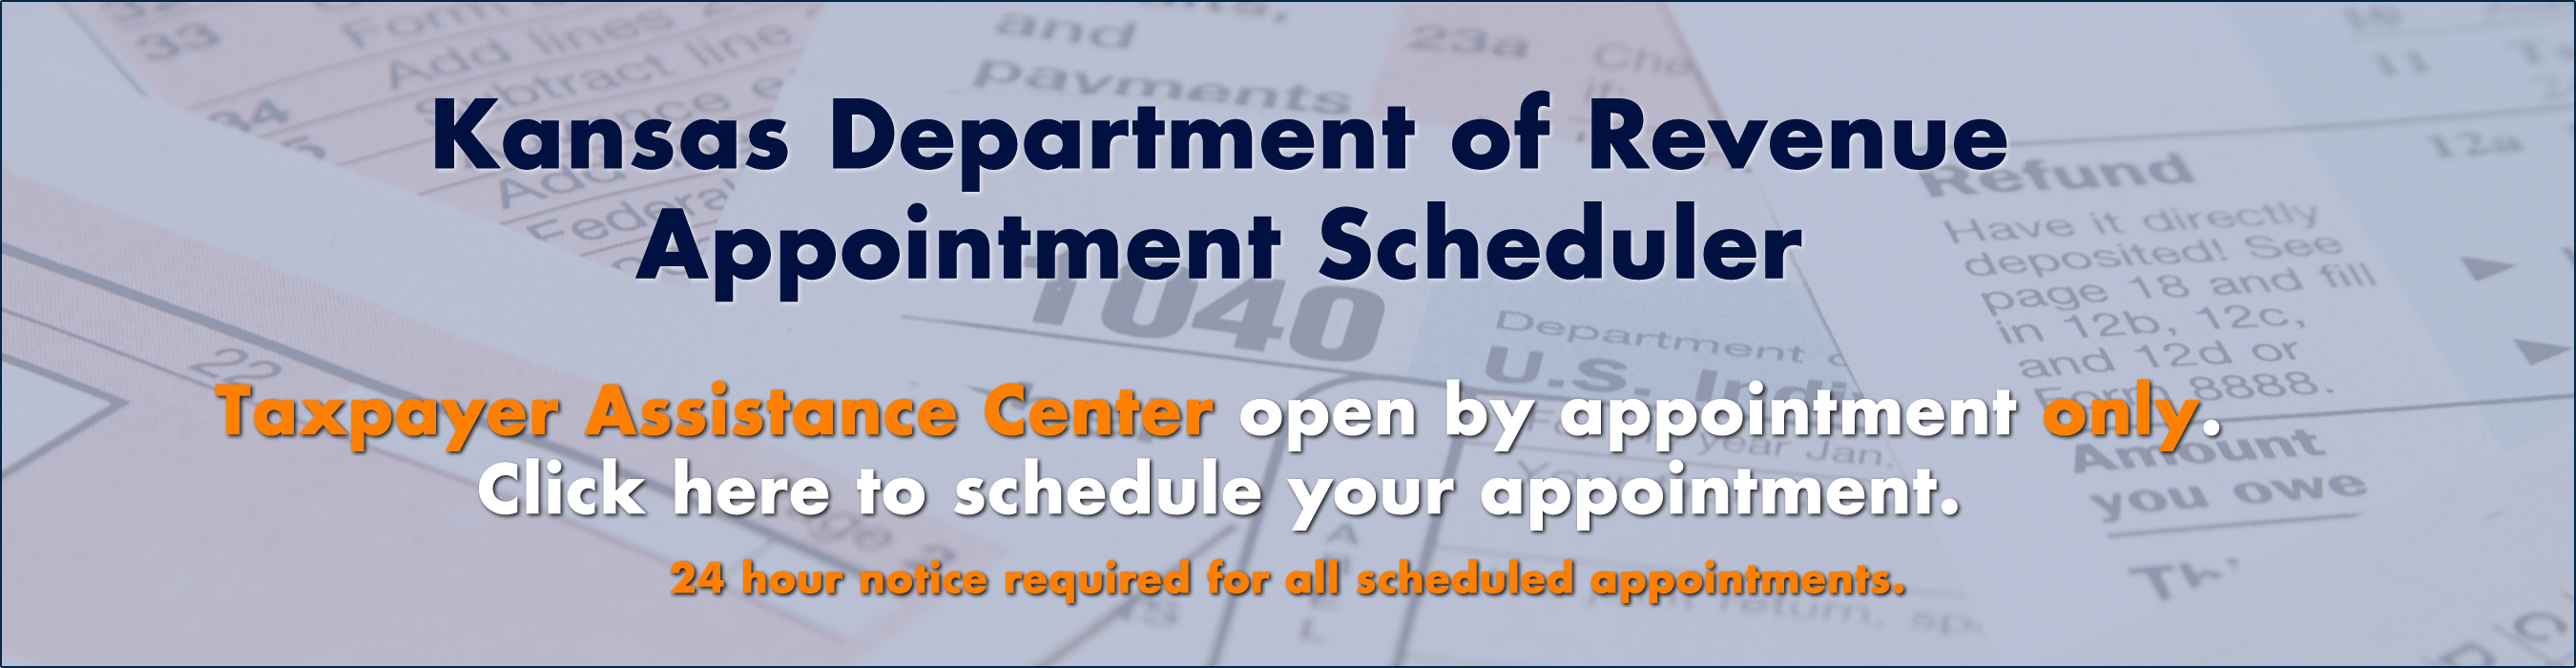 Click here to schedule an appointment with the Taxpayer Assistance Center